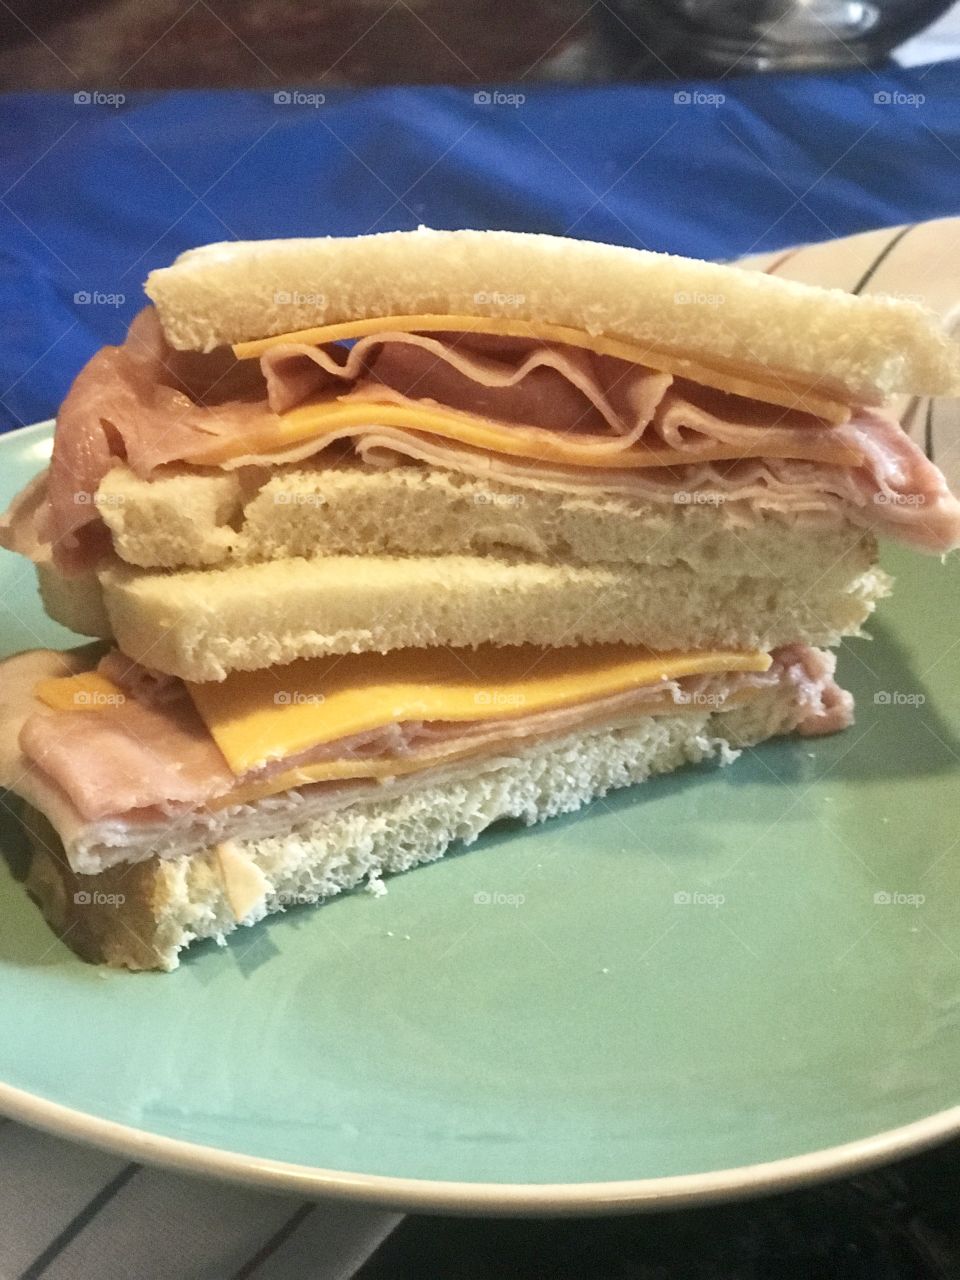 A ham and cheddar cheese sandwich on white bread on a plate served for lunch. USA, America